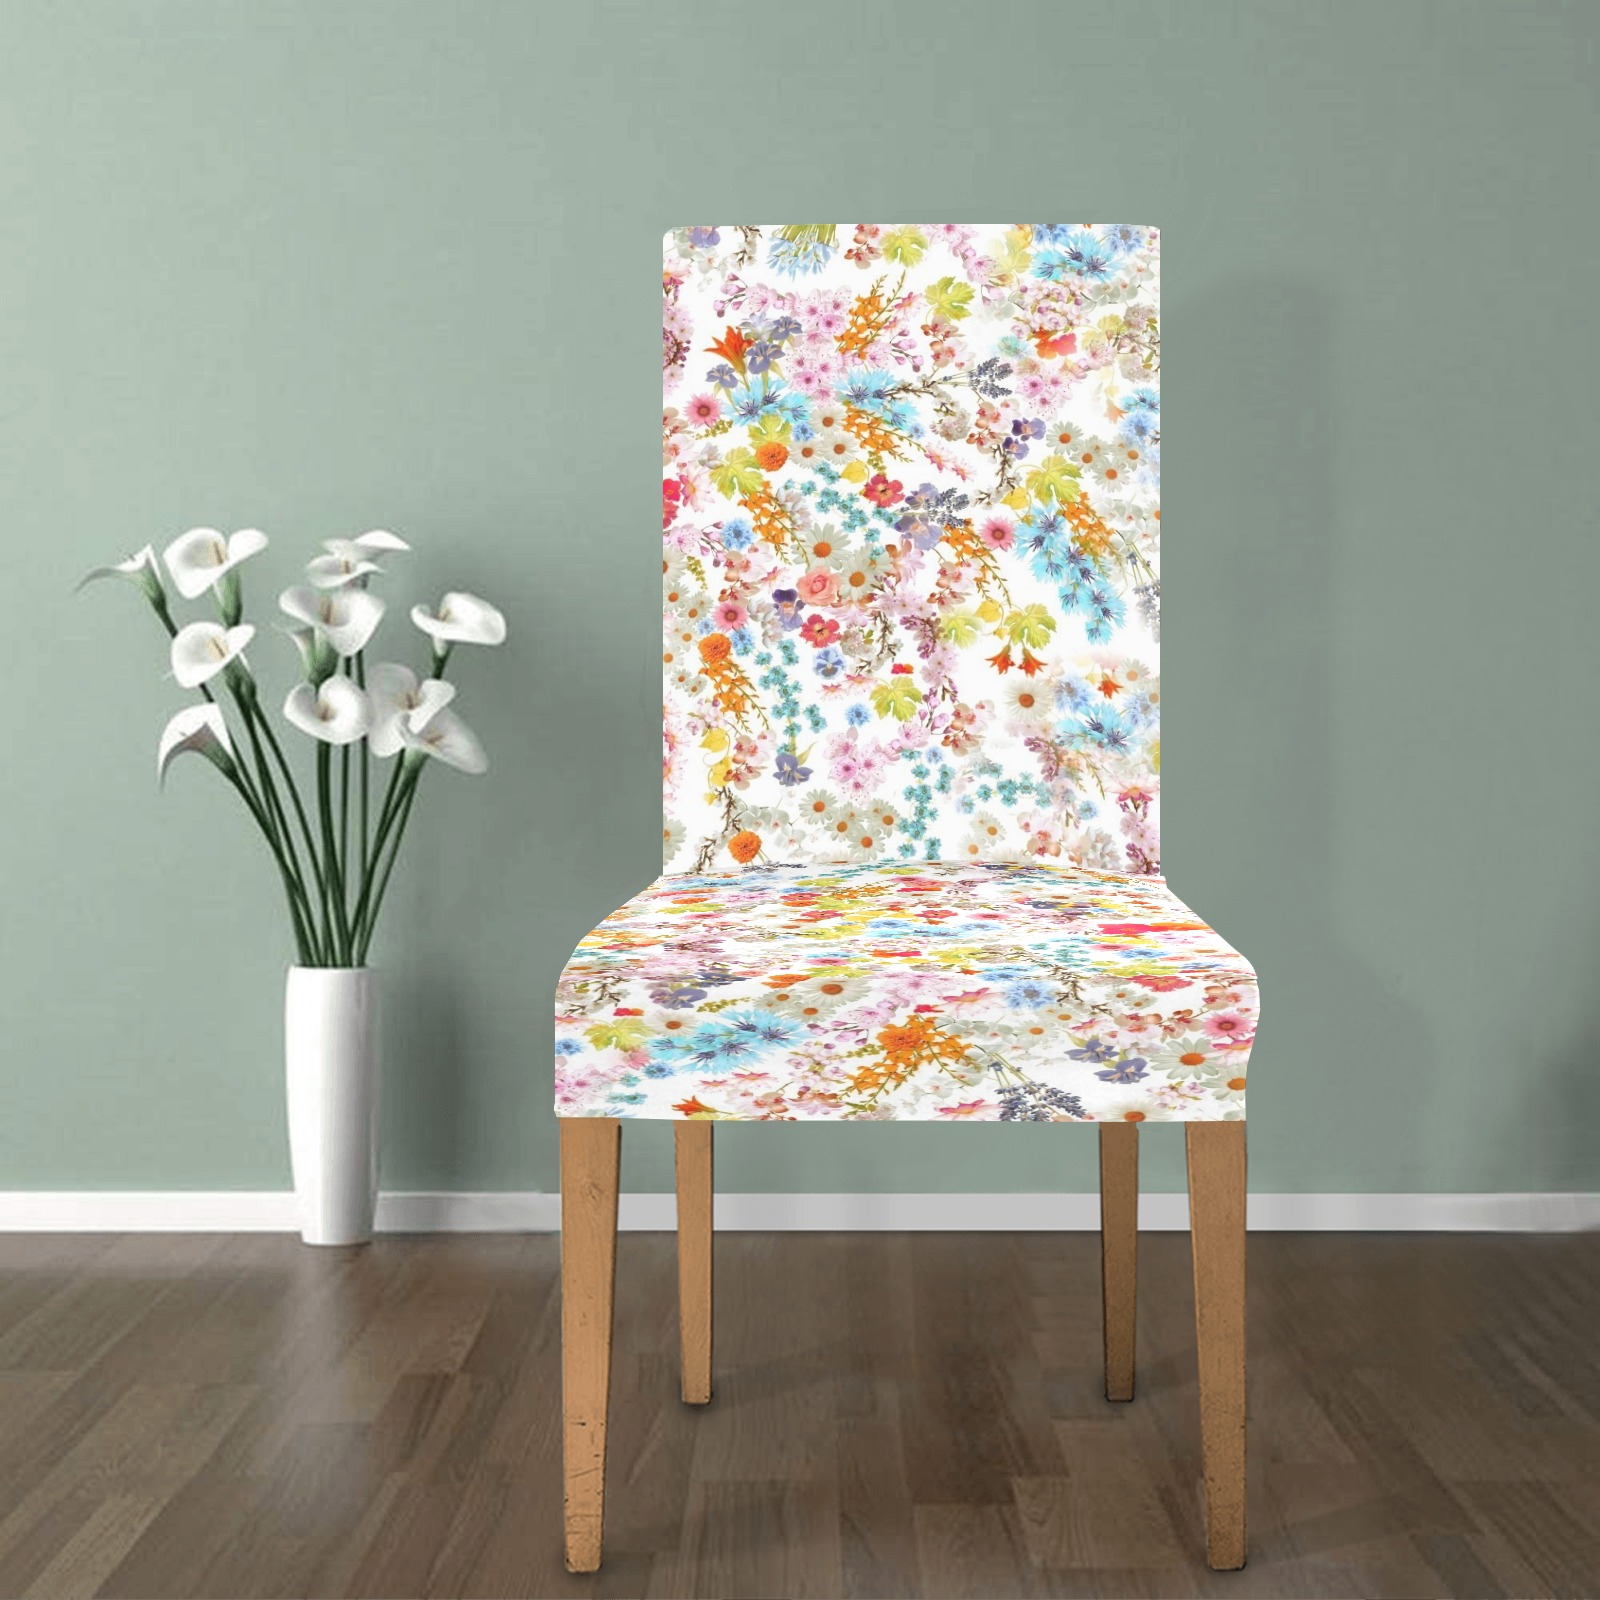 floral design 2 Chair Cover (Pack of 6)